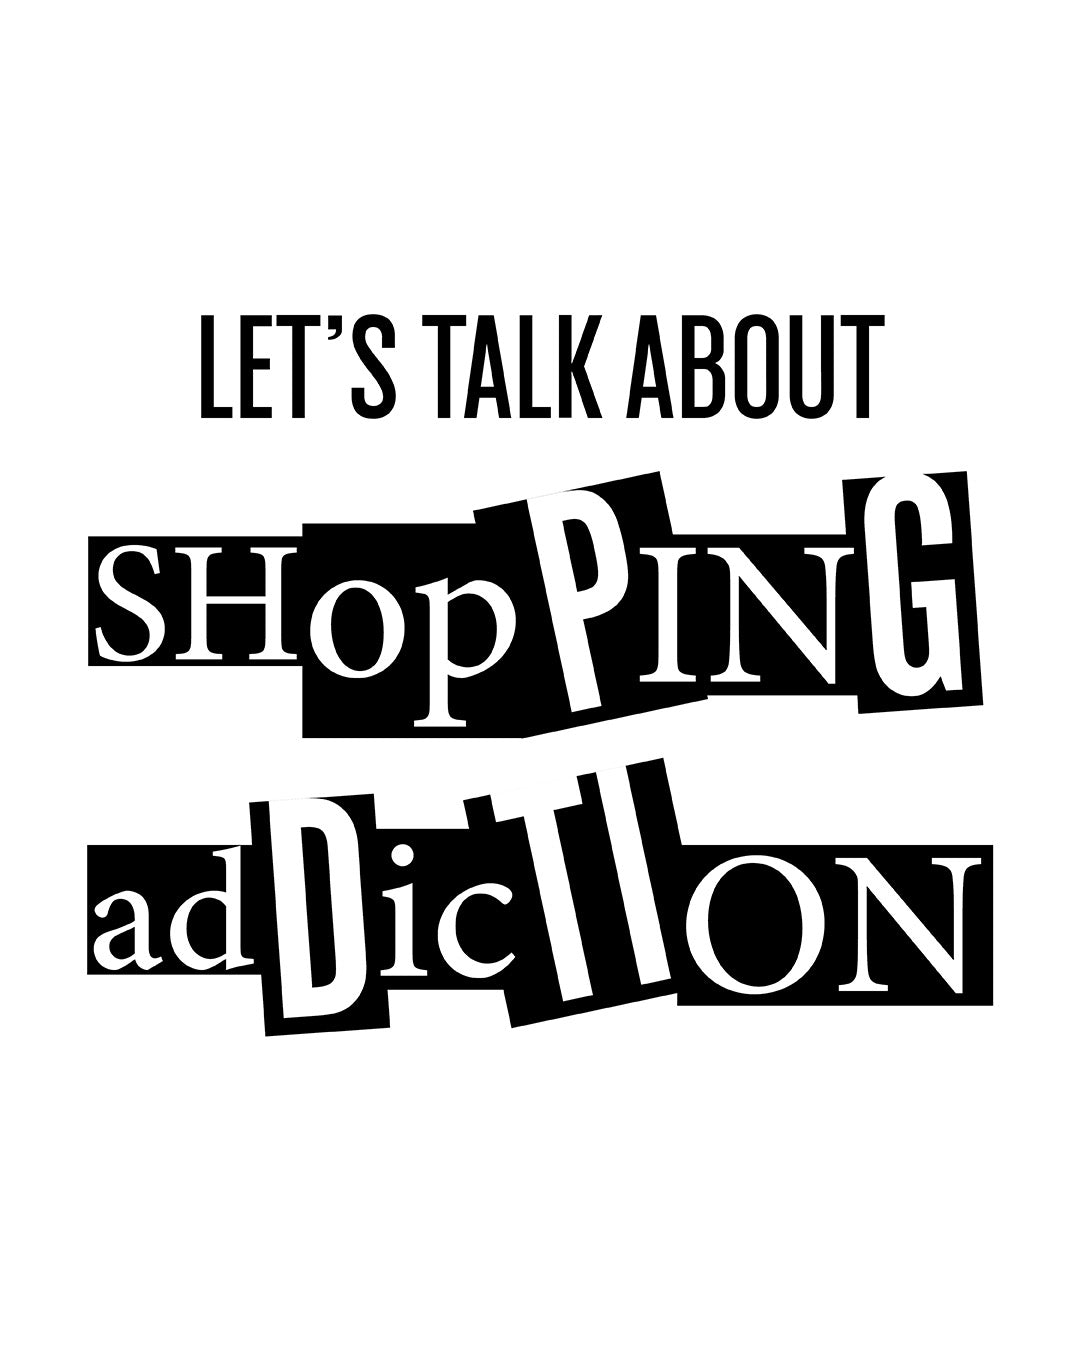 Let's Talk About Shopping Addiction